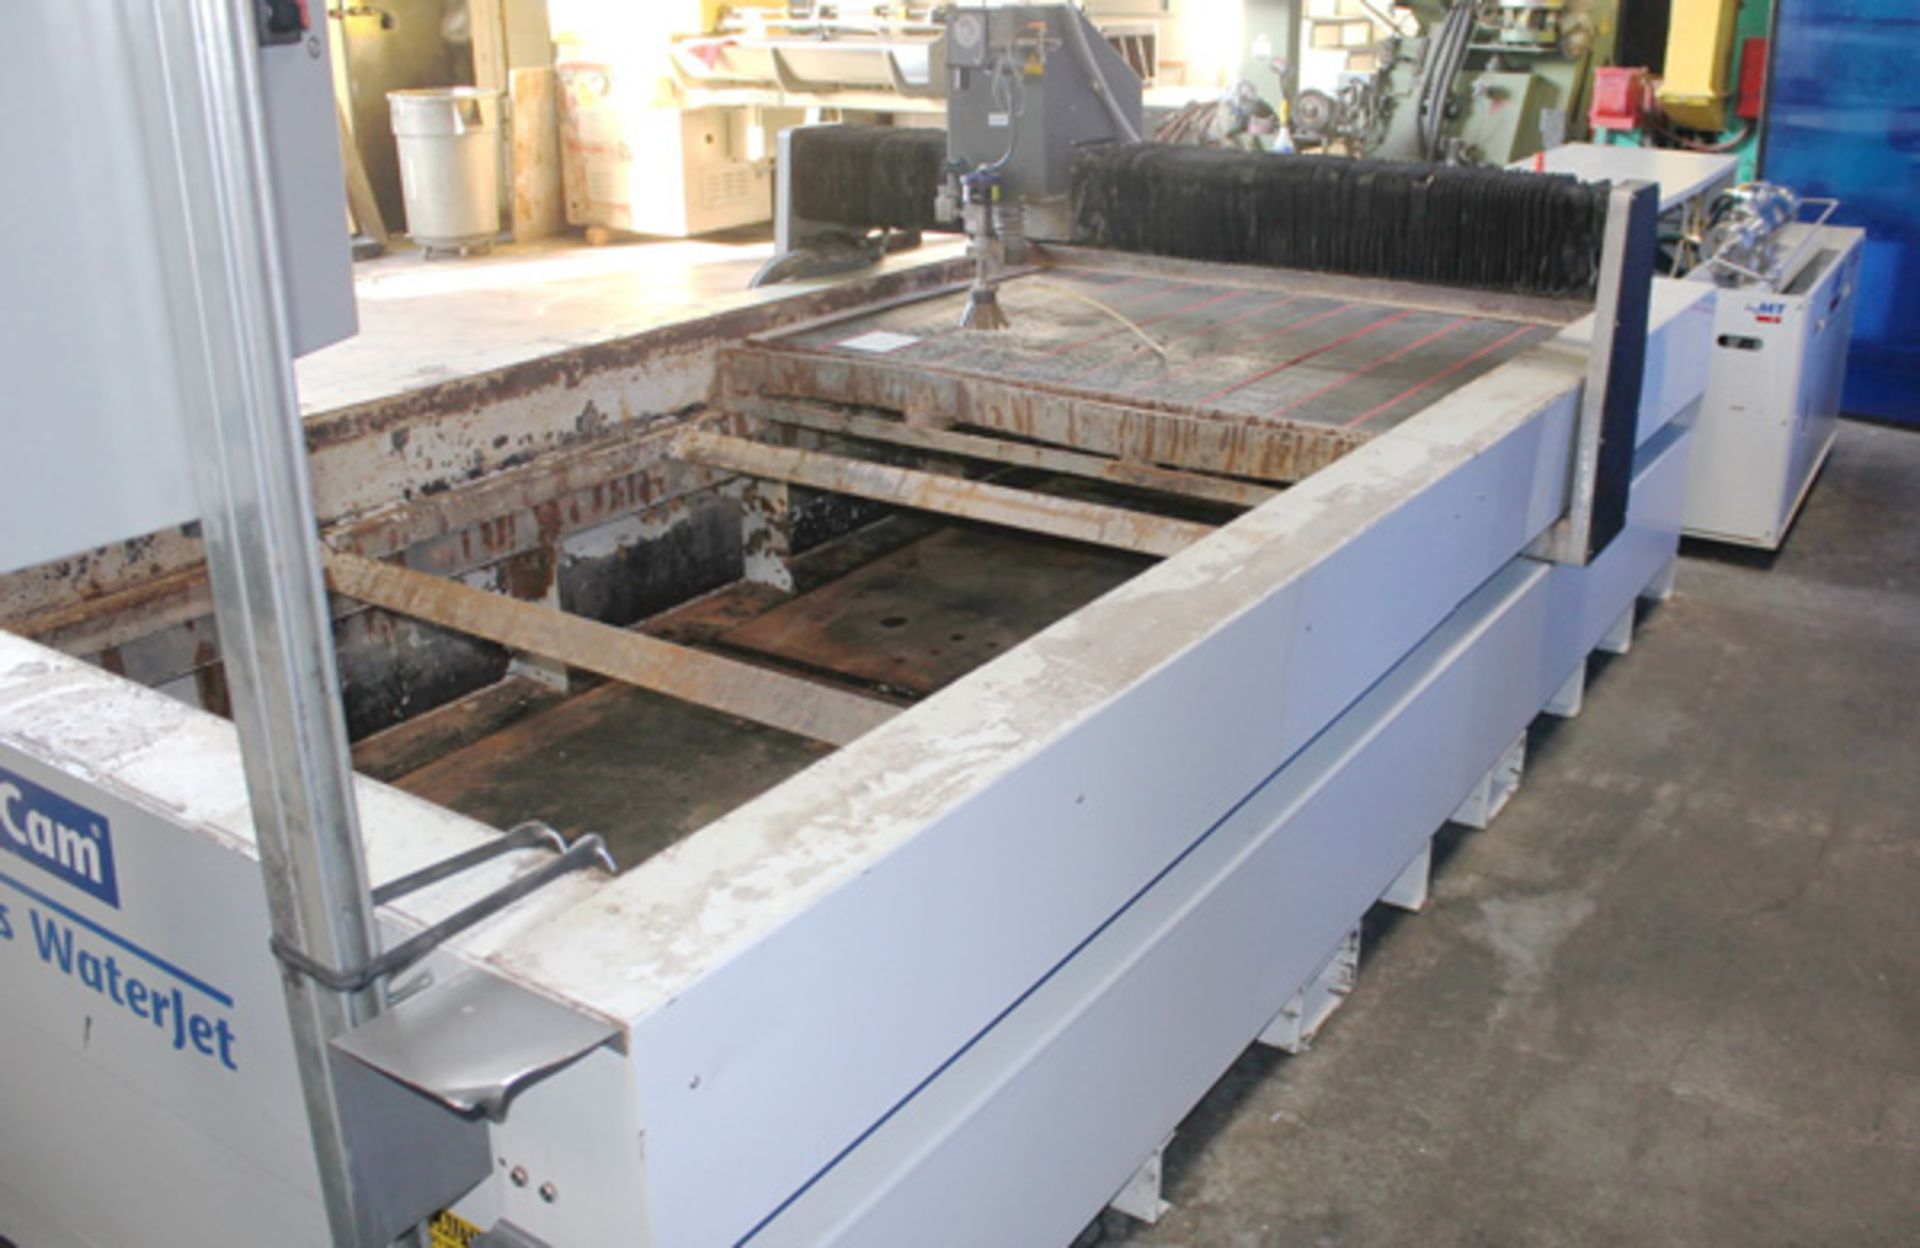 2013 Multicam CNC Water Jet | 120" x 60" x 3.5", Mdl: V-204, S/N: V-204-W09724 - 8446HP - Image 8 of 23